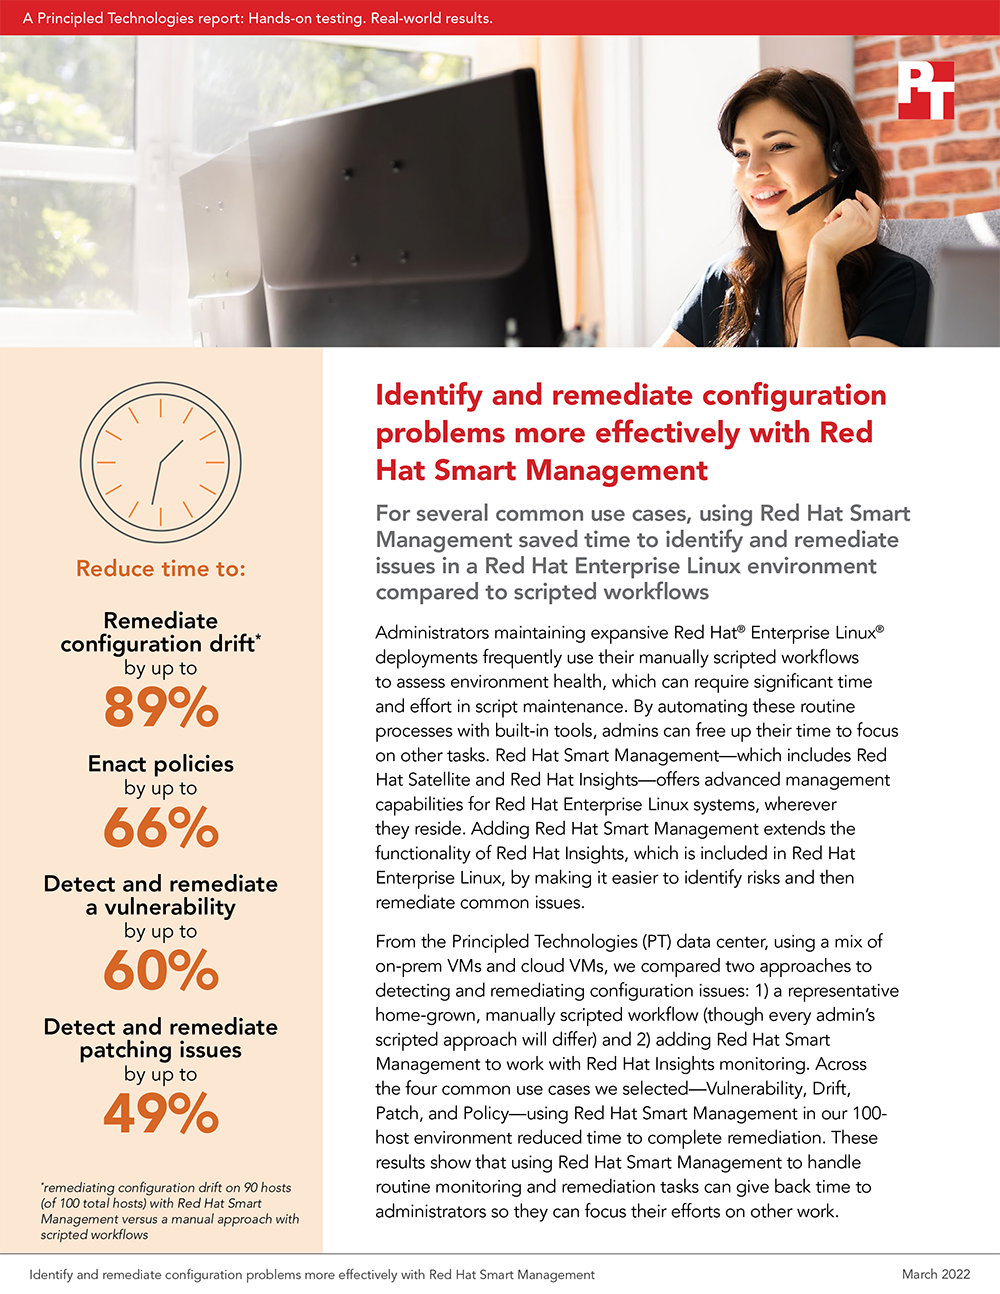 Identify and remediate configuration problems more effectively with Red Hat Smart Management